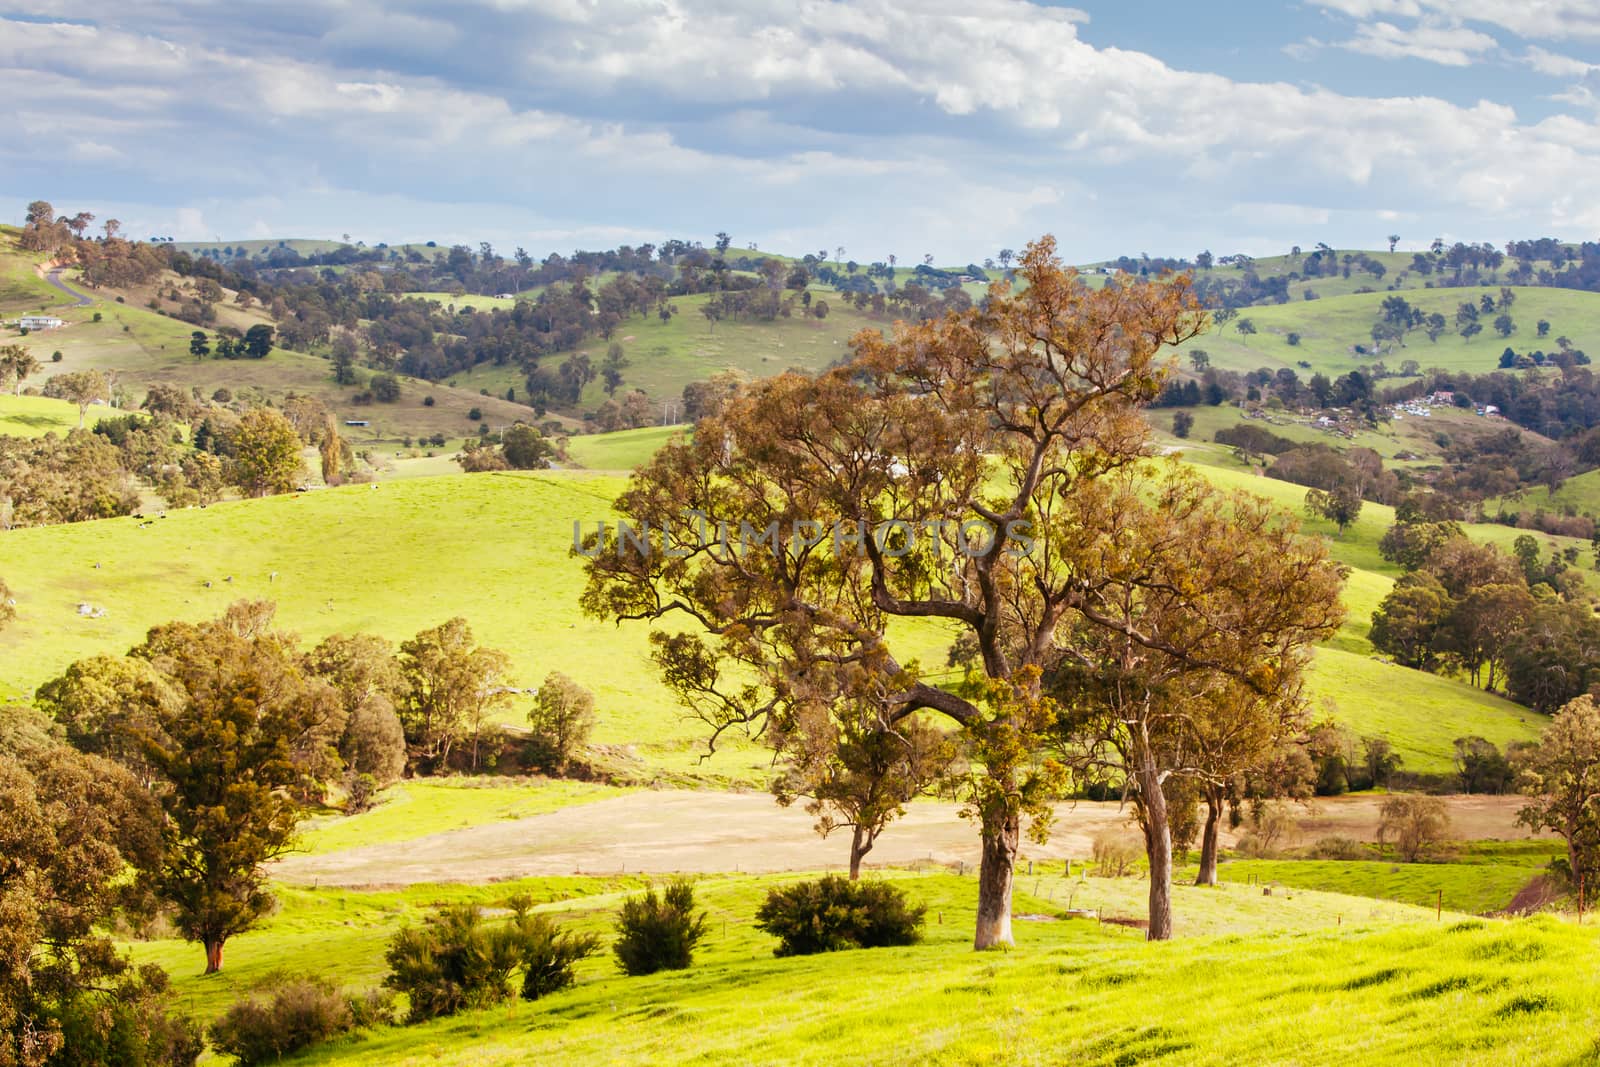 A view over Bega and surrounding farmland on a sunny day in New South Wales, Australia